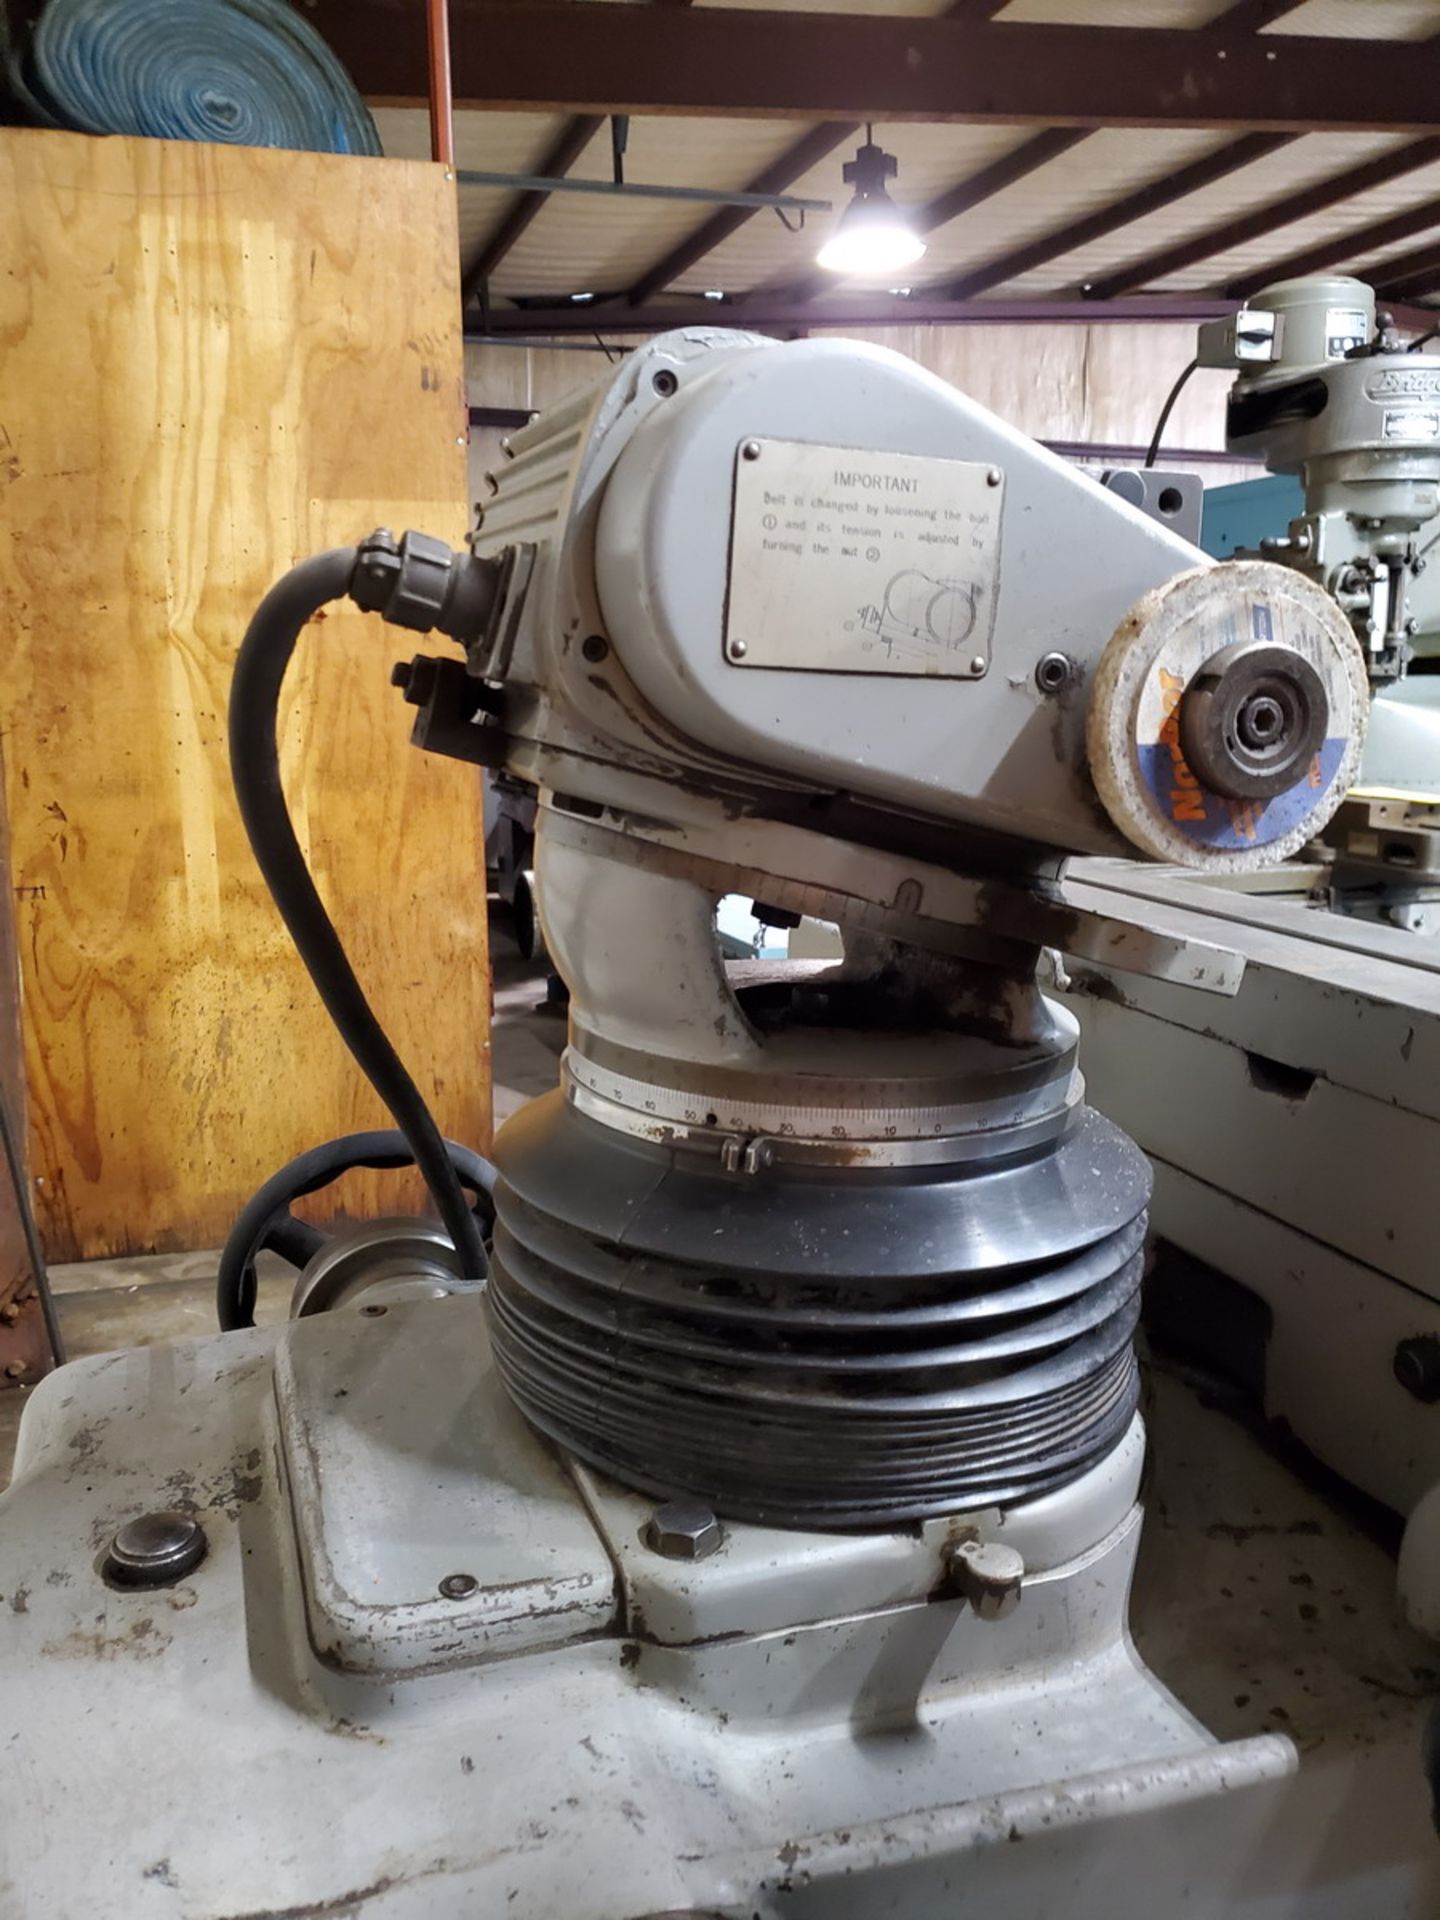 Makino C-40 Tool&Cutter Grinder Machine W/ 3-Jaw Chuck; W/ Tooling & Accessories - Image 14 of 26